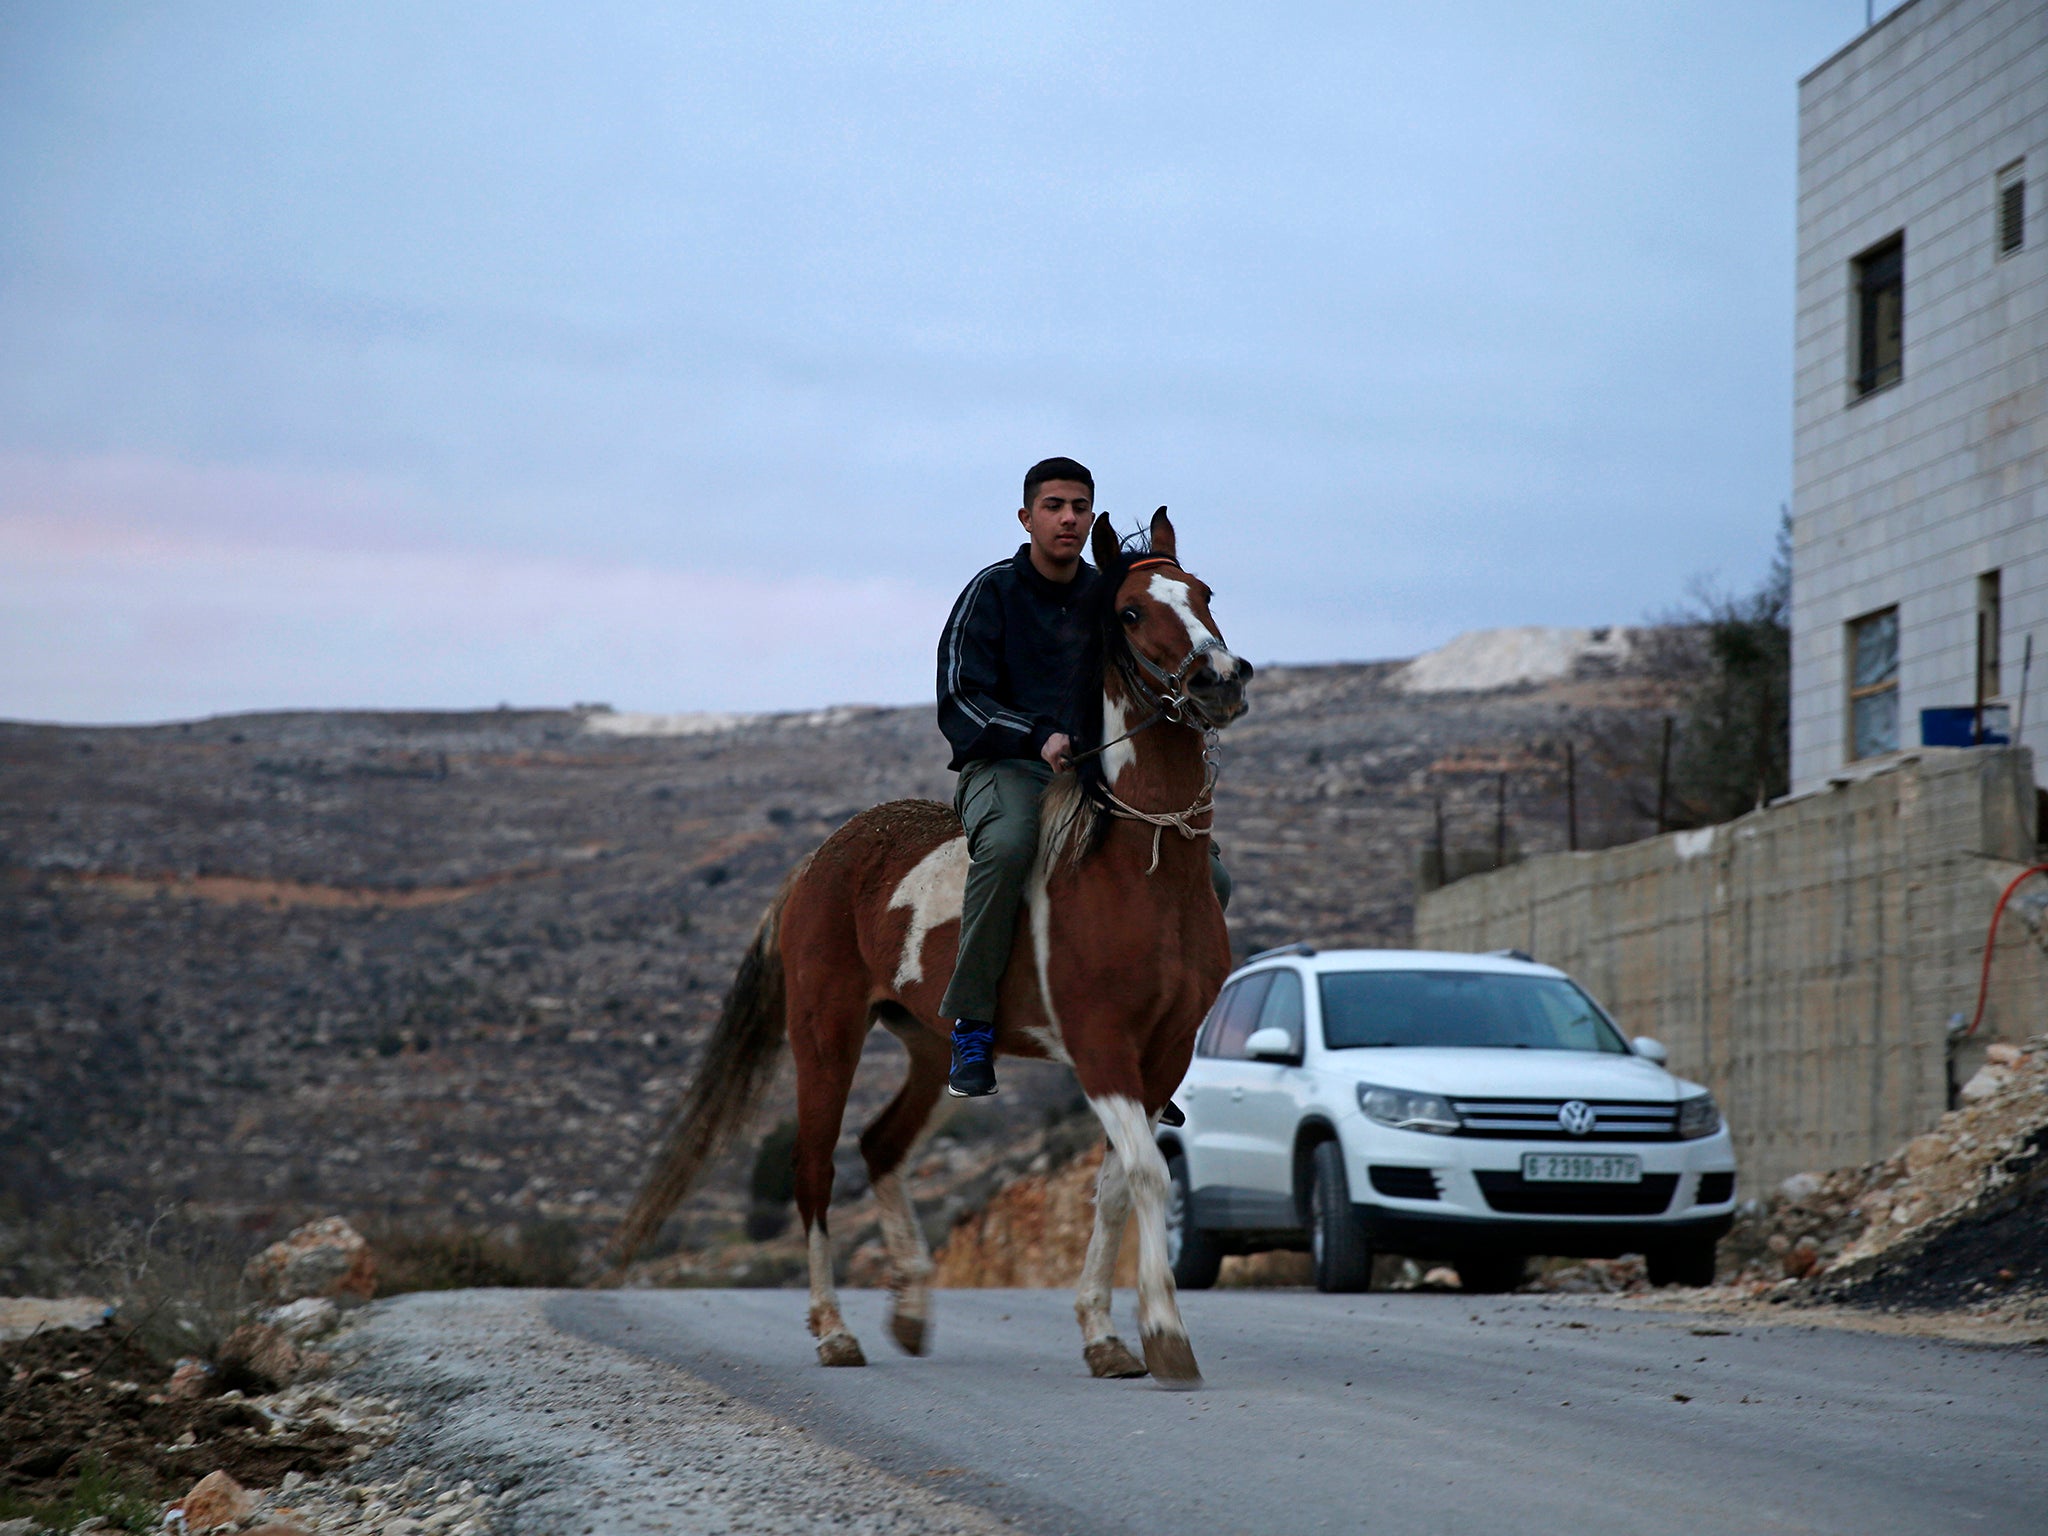 Palestinian Hamza Hamad,16, rides his horse at his home, in the village of Silwad, east of the West Bank city of Ramallah